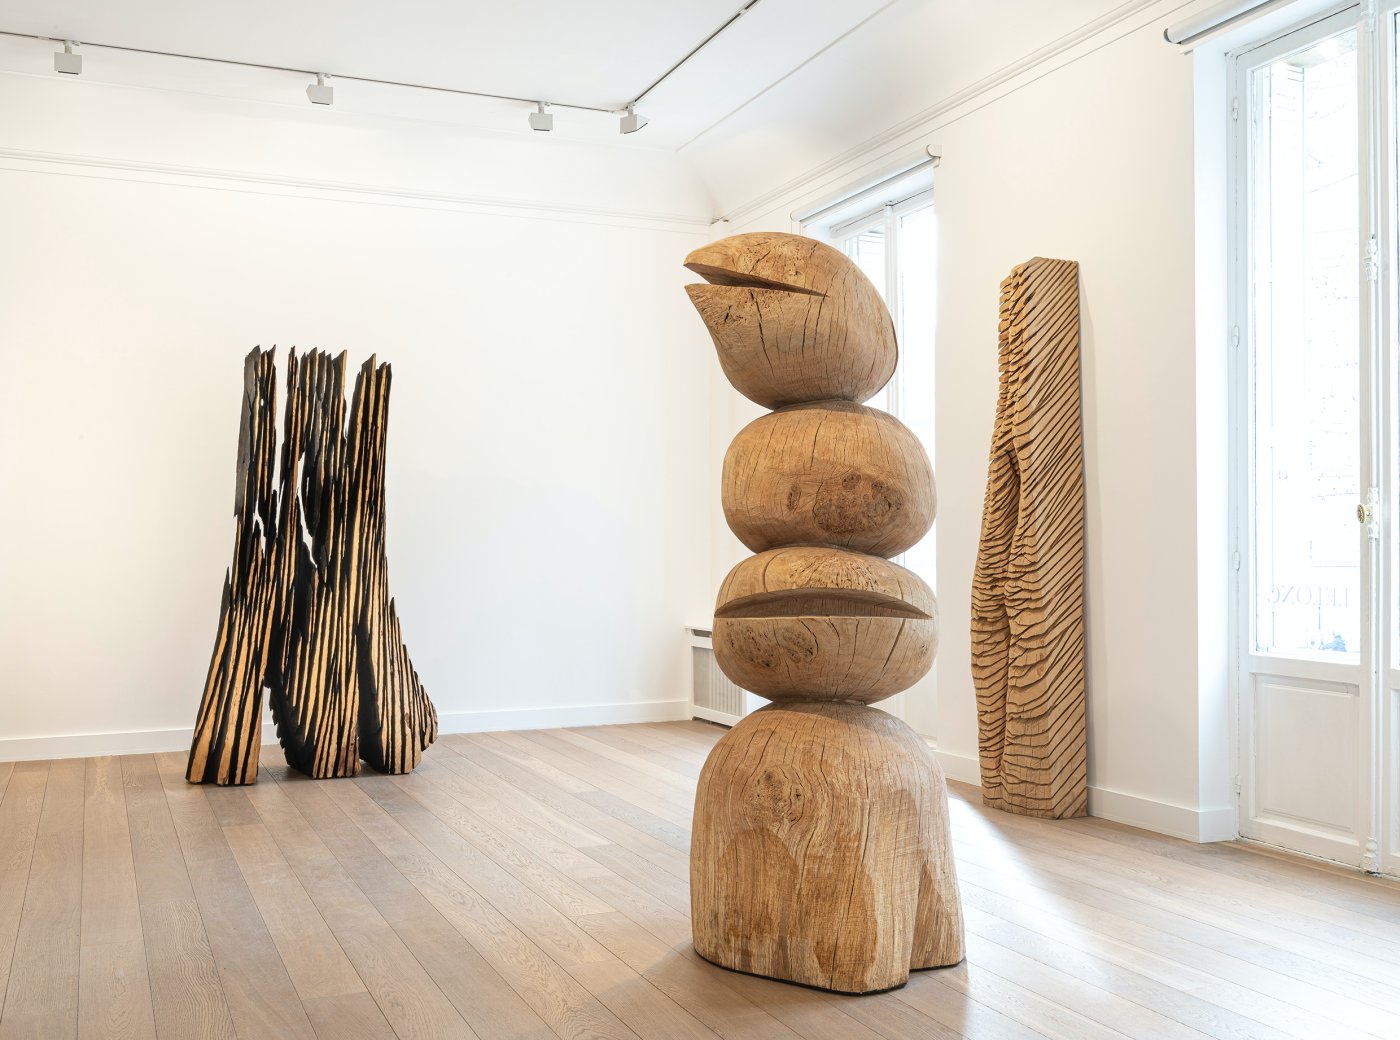 Installation image for David Nash: The Many Voices of the Trees, at Galerie Lelong & Co.